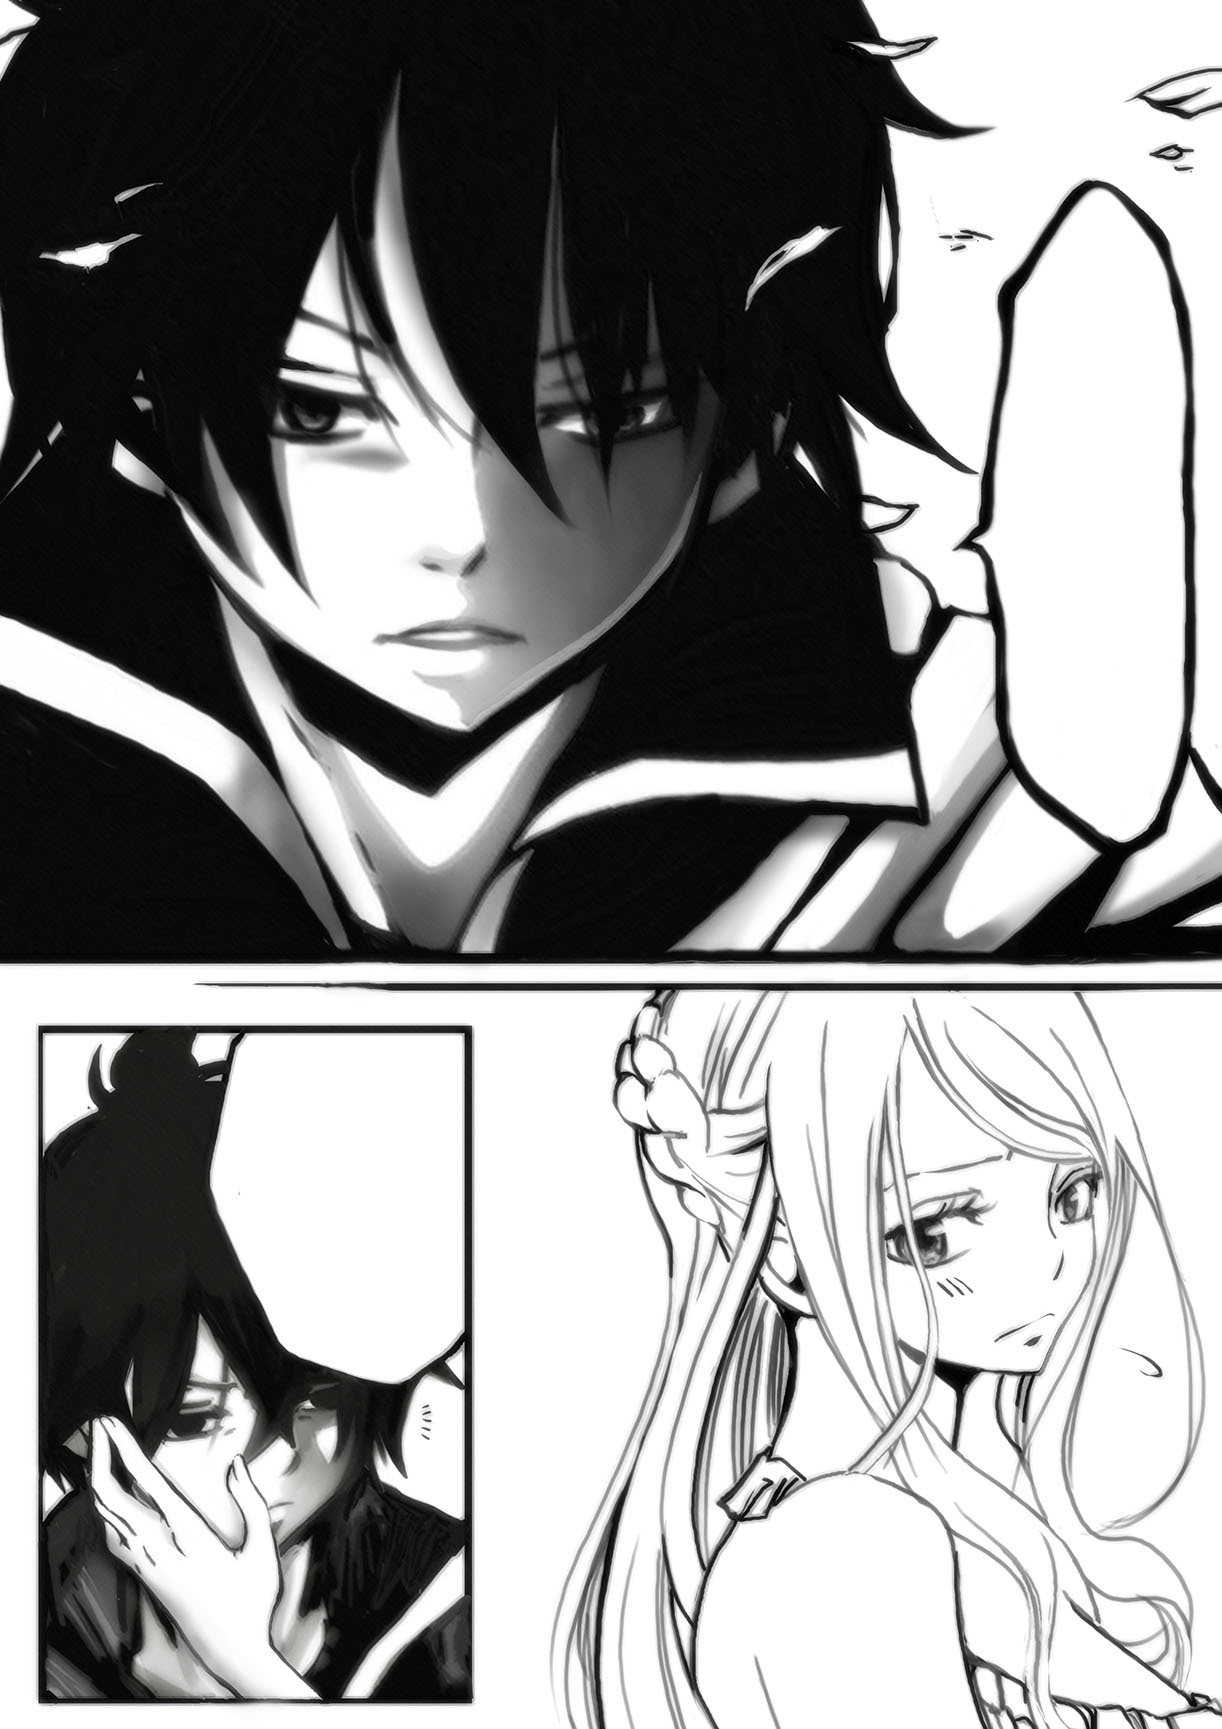 zippi44:  I decided to do a short comic about the connections between Layla and Zeref